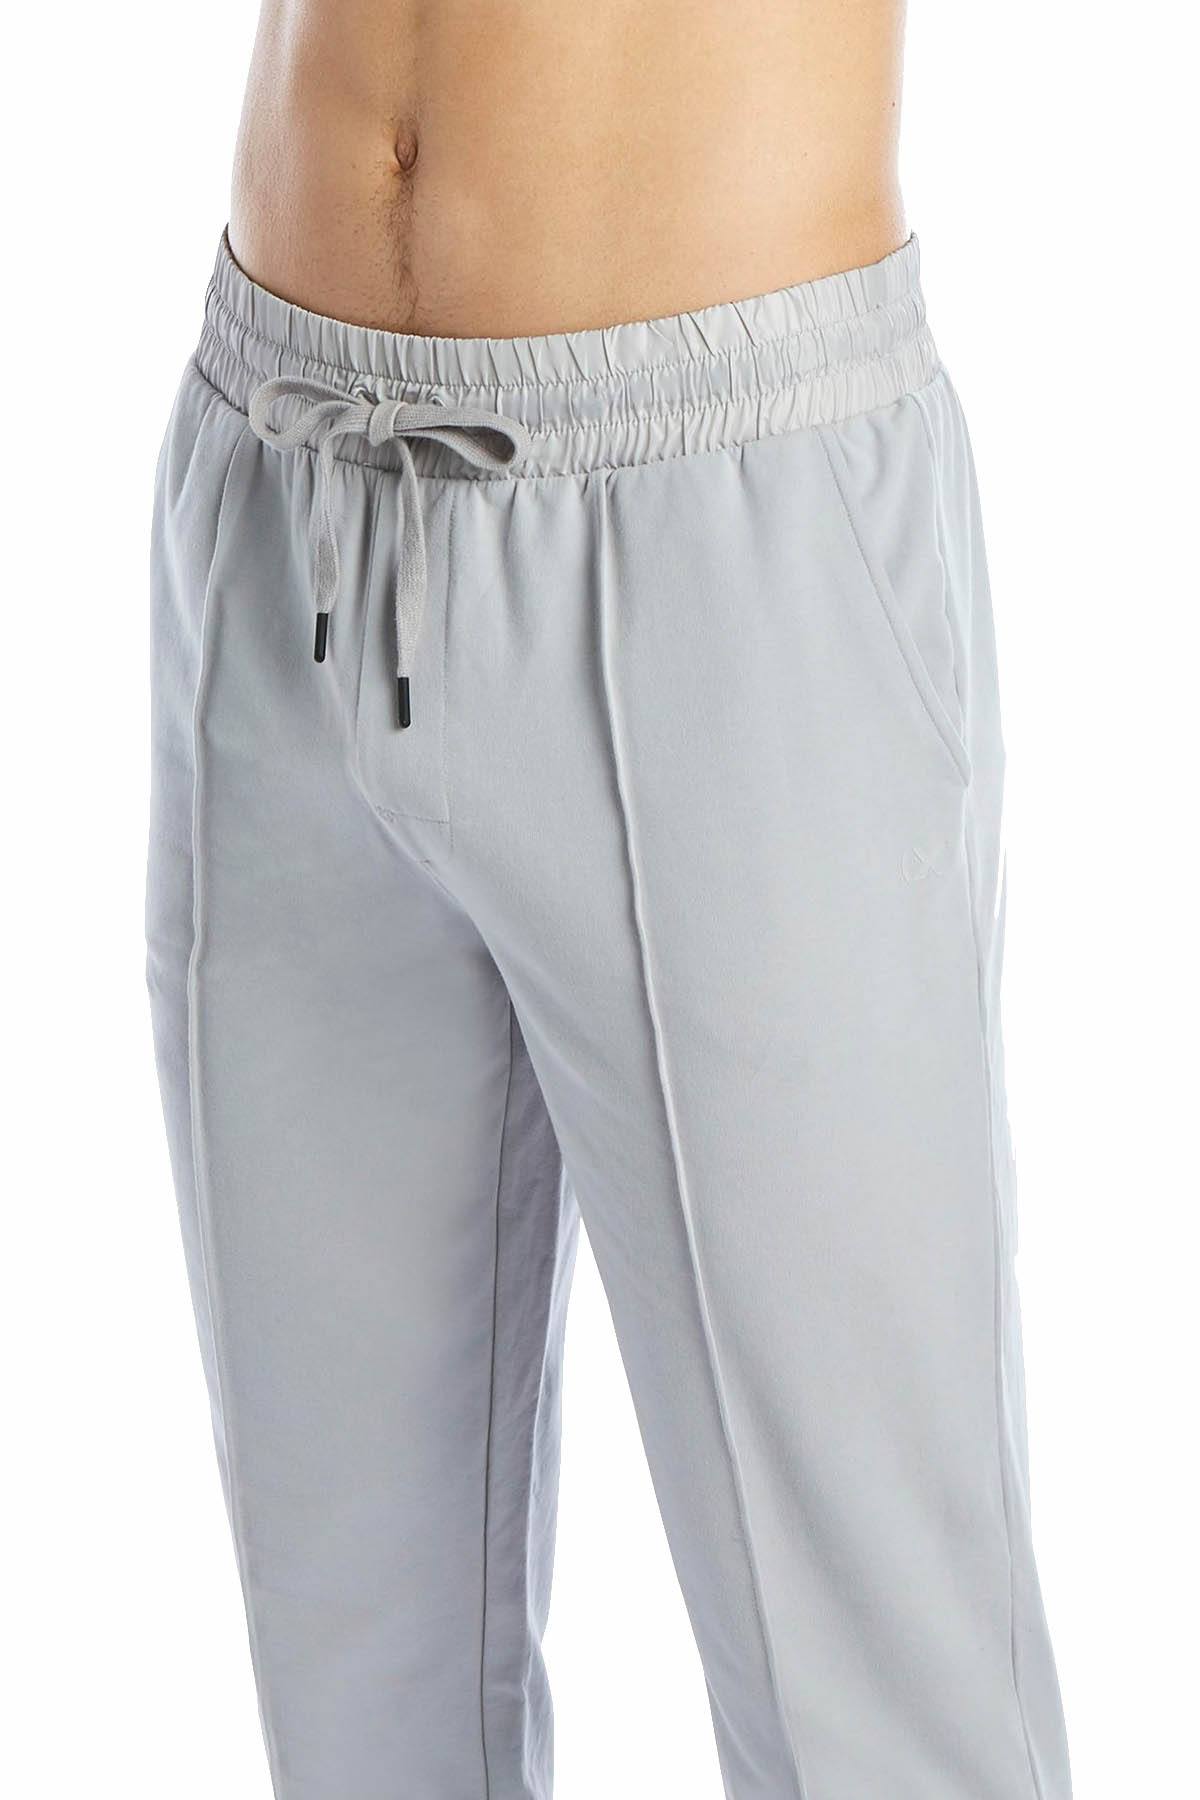 2(X)IST Cement-Grey Modern Classic Lounge Pant